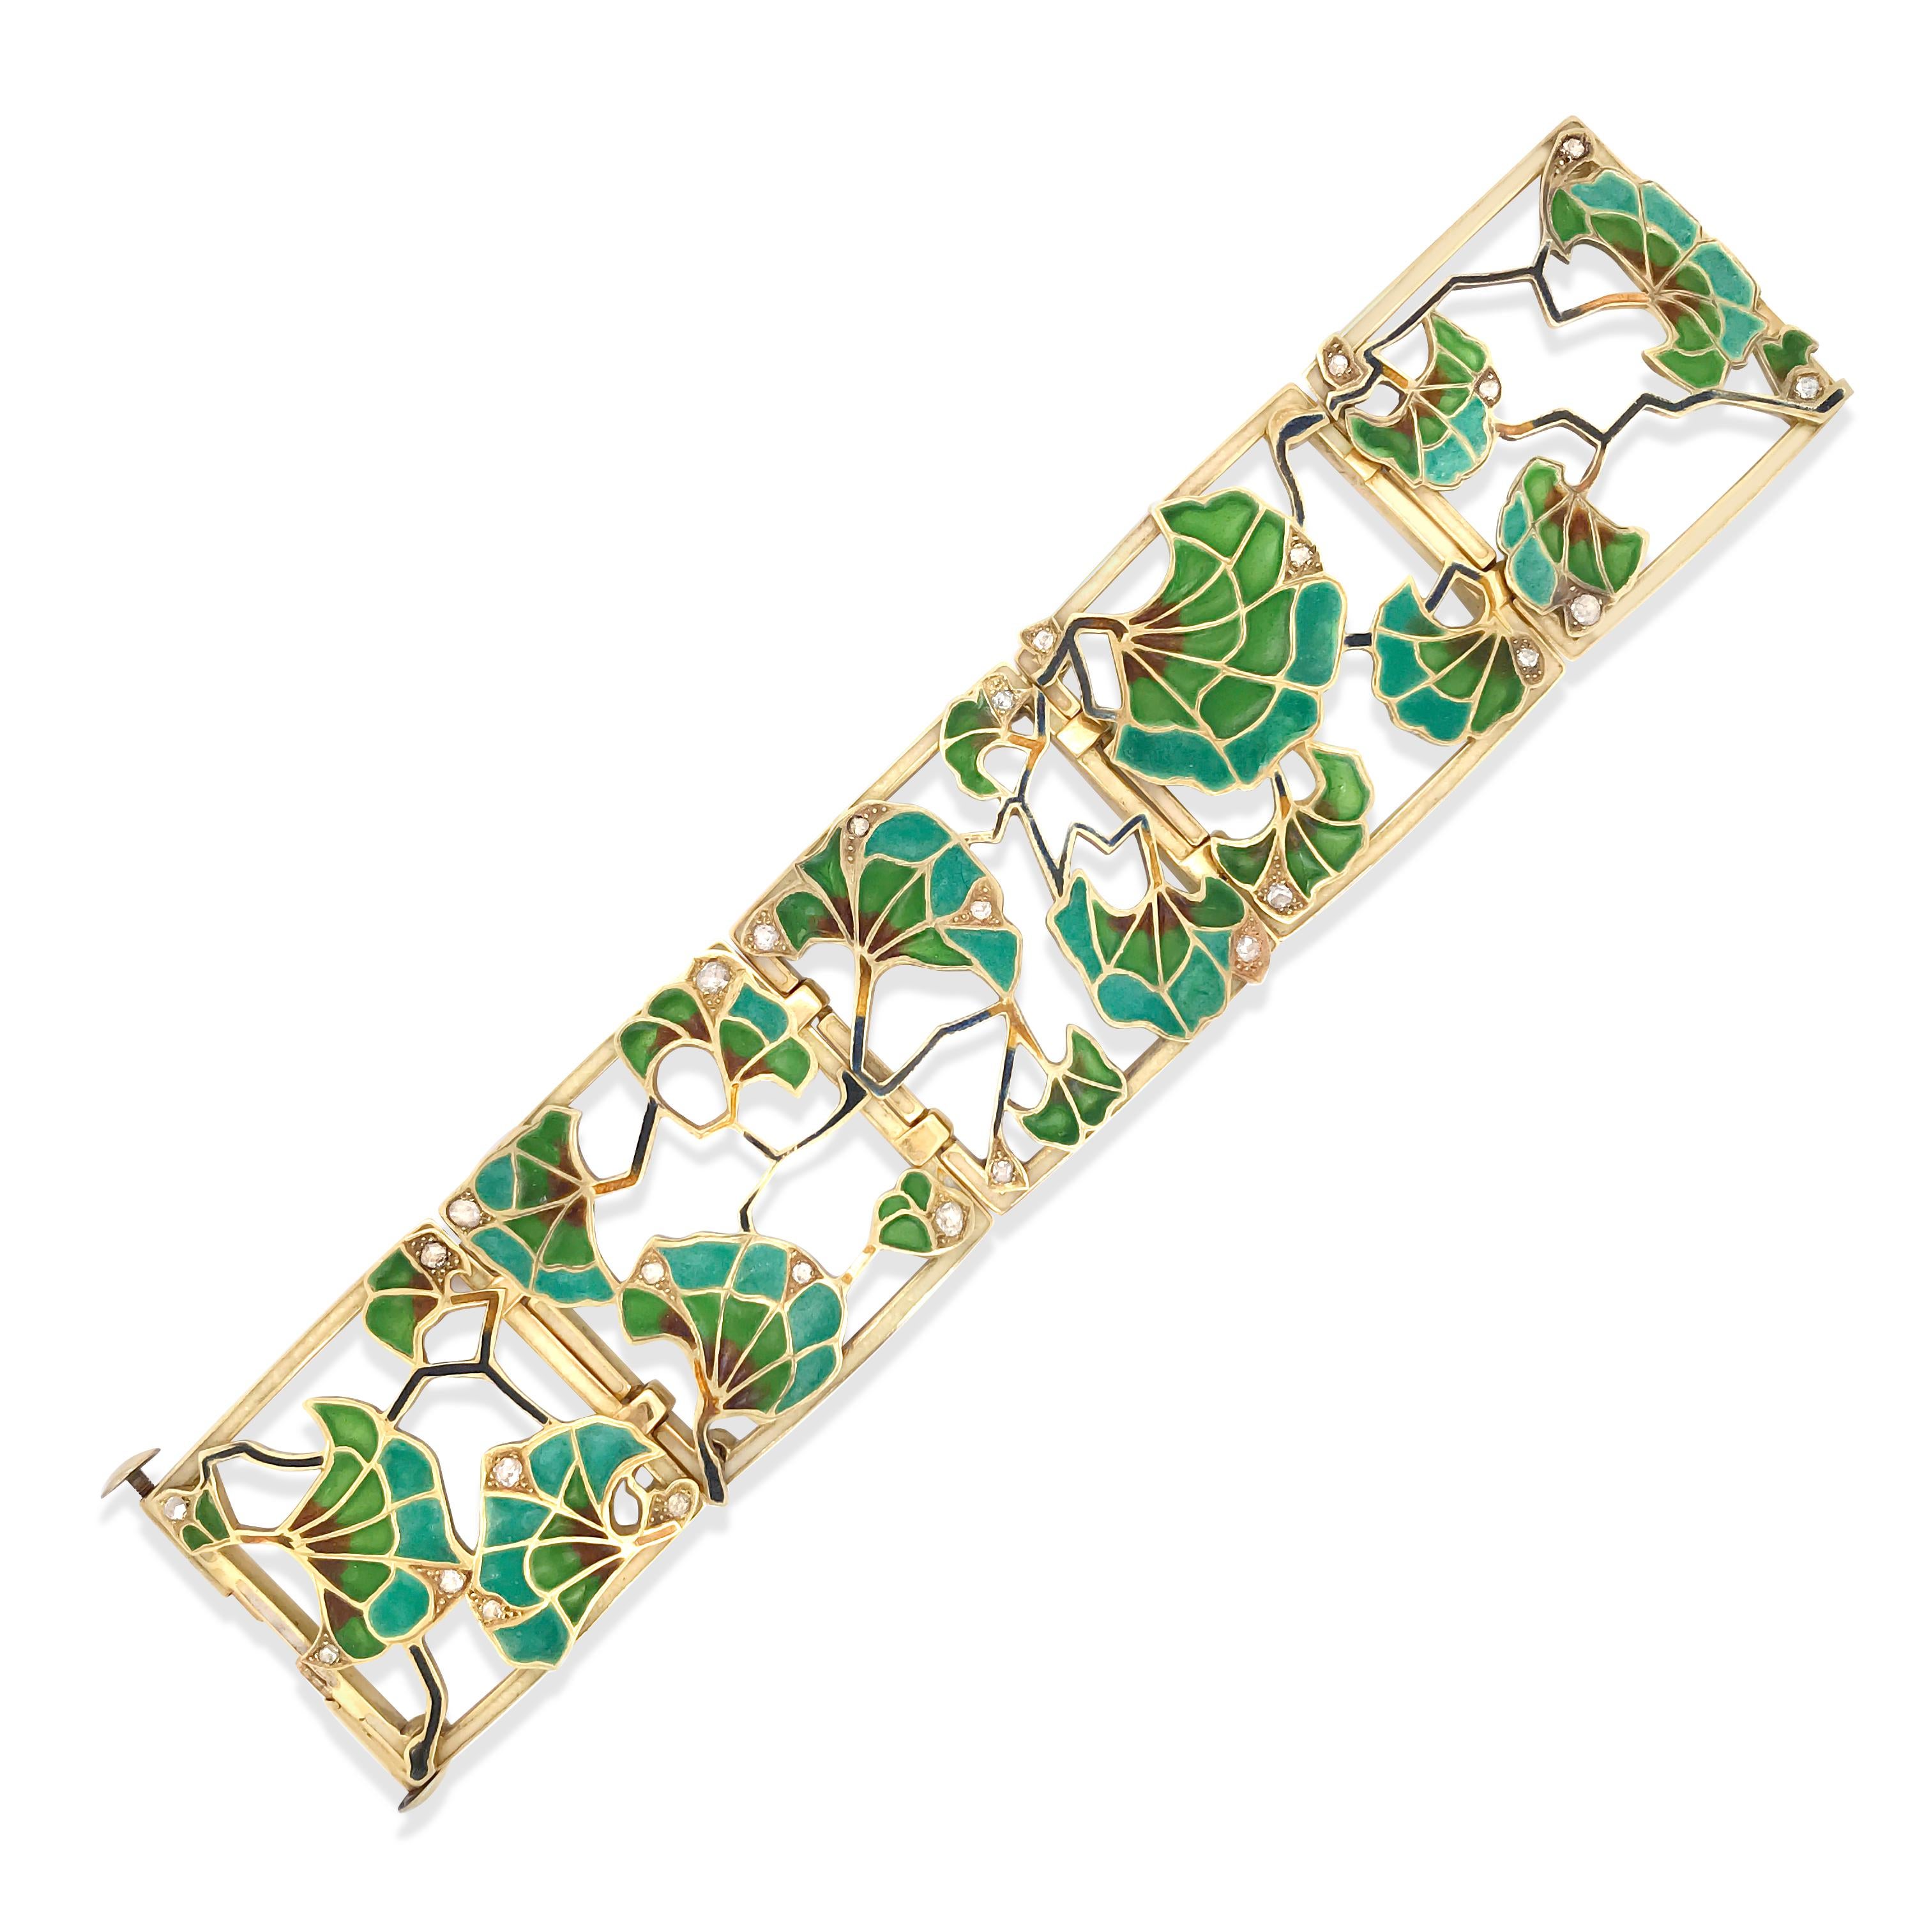 This Art Nouveau gold bangle bracelet is crafted in 18K yellow gold and embellished with lilypad-shaped blue, green, orange Plique-a-jour enamel, enhanced with 27 rose-cut diamonds weigh cumulatively 1.05 carats, mostly G-H-I/I clarity and some SI